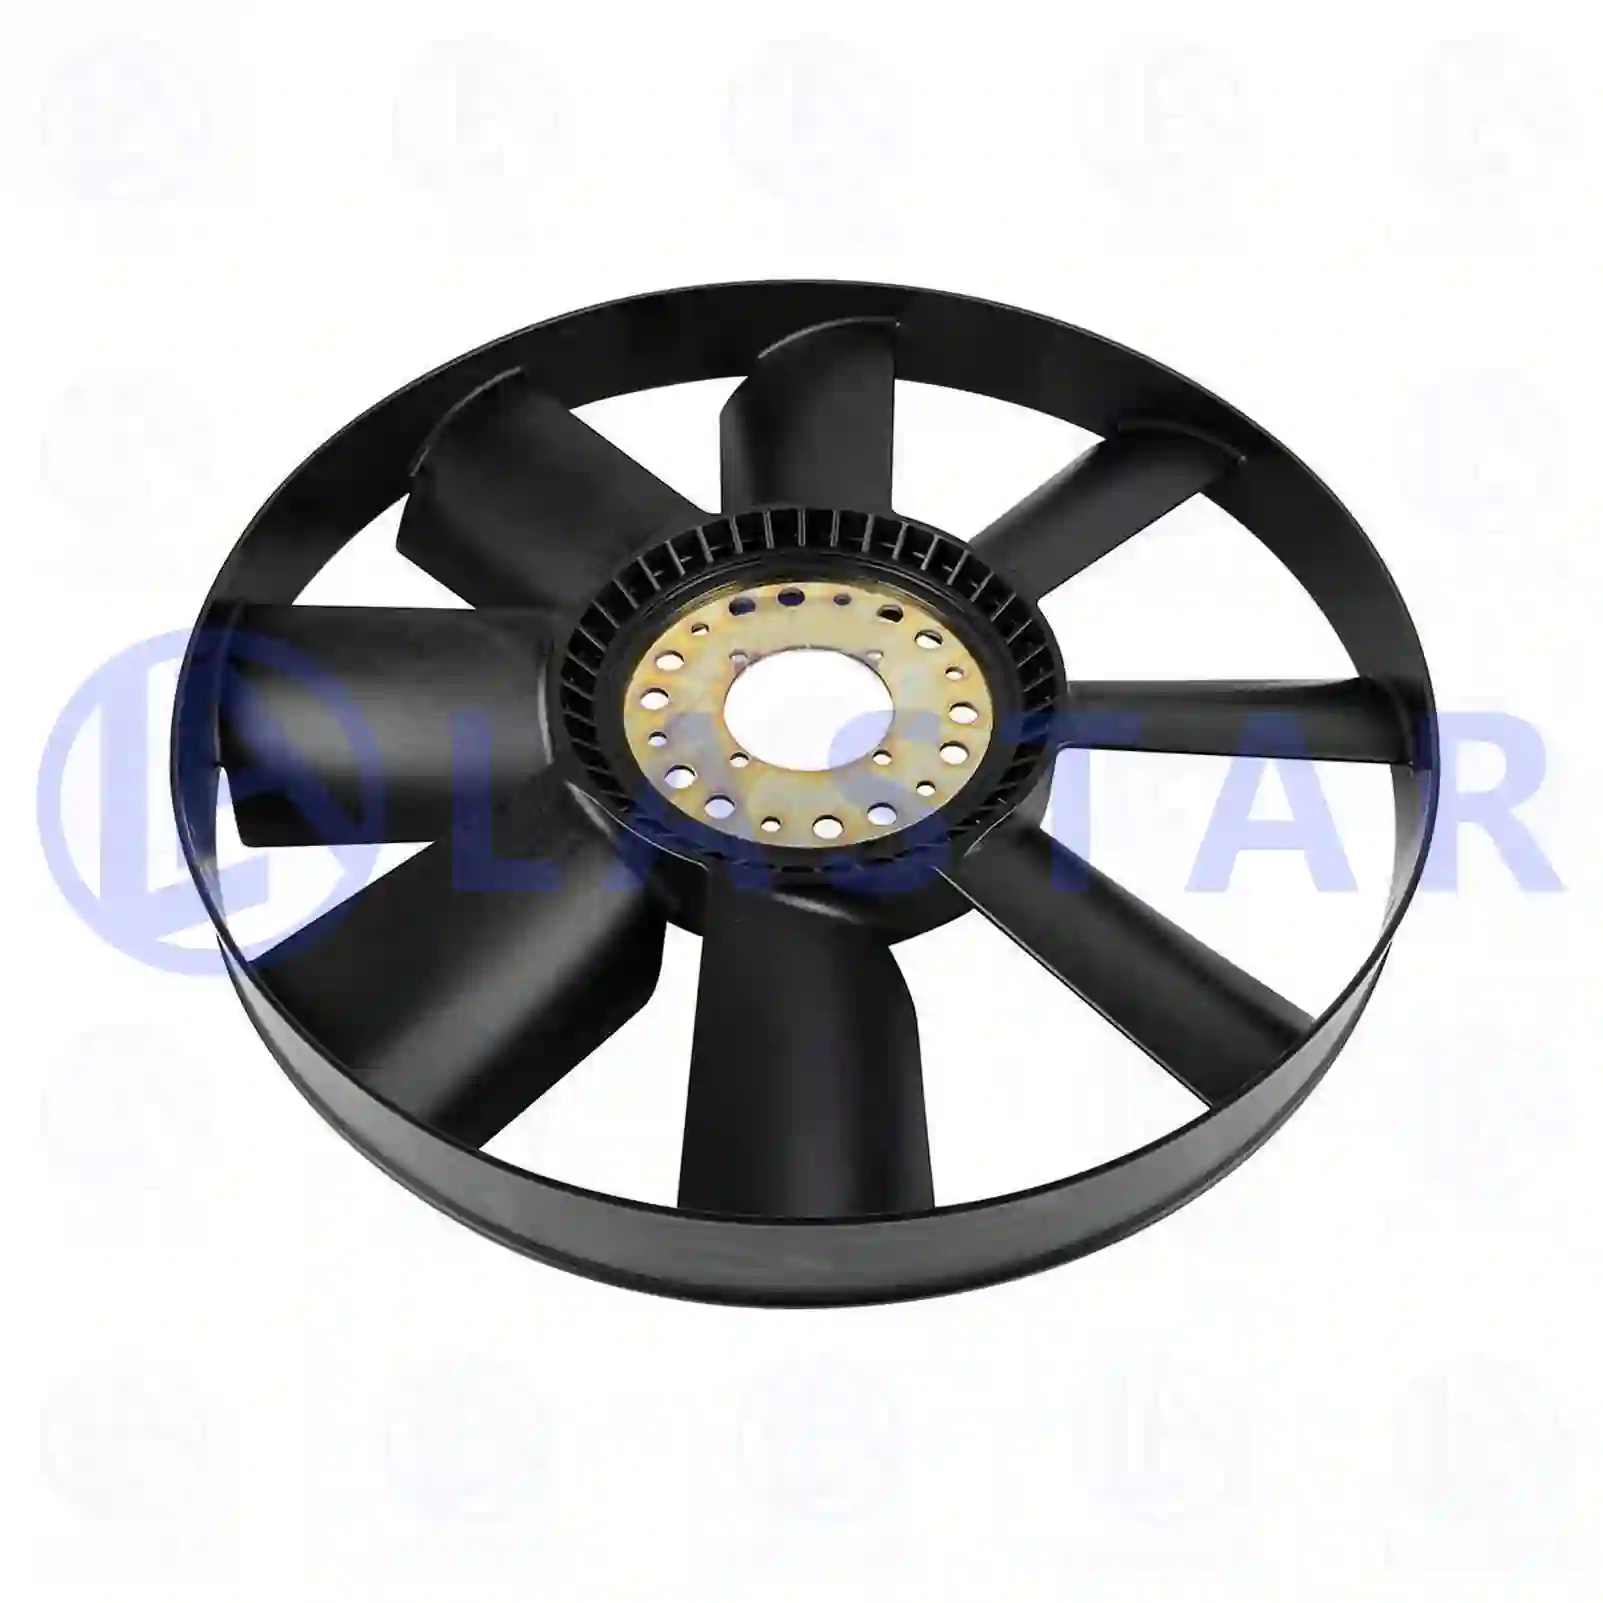 Fan, 77707919, 9042050206, 9042050406, ZG00372-0008 ||  77707919 Lastar Spare Part | Truck Spare Parts, Auotomotive Spare Parts Fan, 77707919, 9042050206, 9042050406, ZG00372-0008 ||  77707919 Lastar Spare Part | Truck Spare Parts, Auotomotive Spare Parts